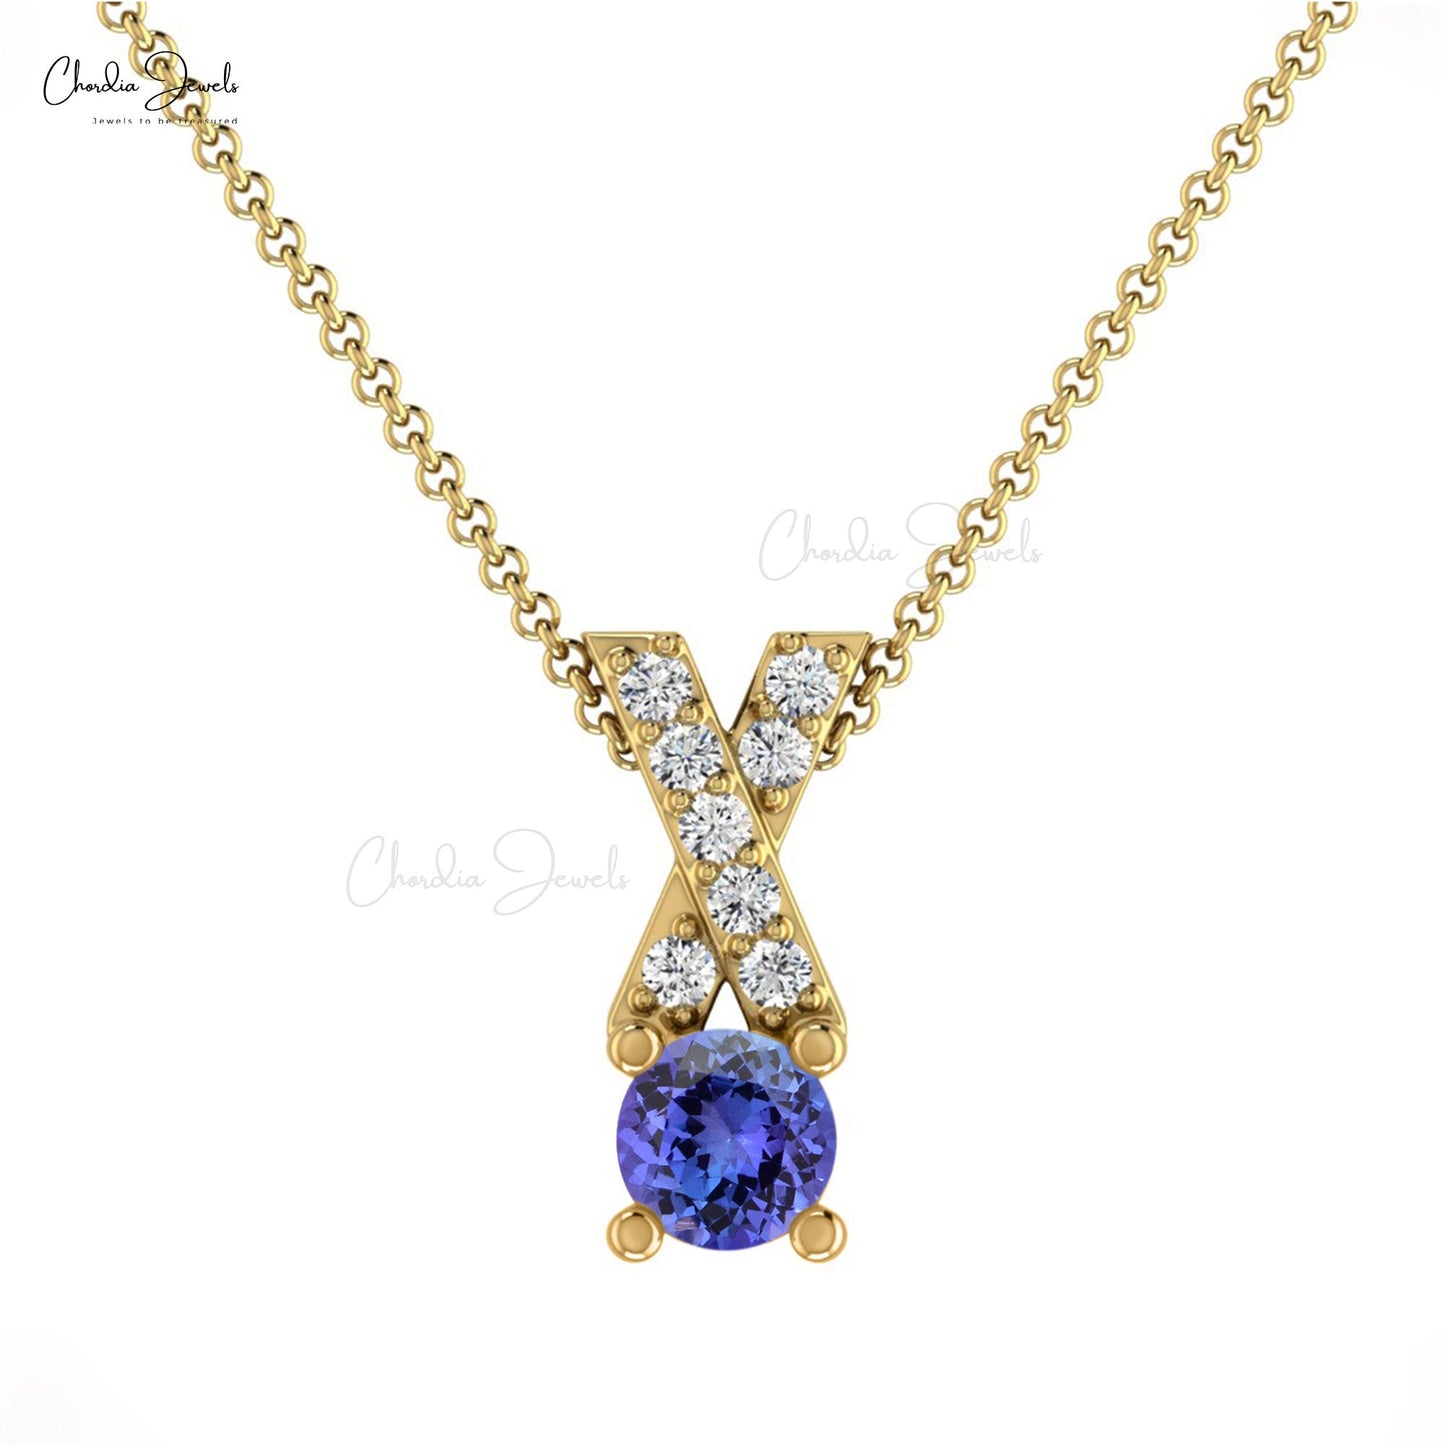 Simple Vintage Criss-Cross Dainty Pendant 5mm Round Cut Natural Tanzanite and White Diamond Pendant Necklace in 14k Solid Gold Jewelry For Gift